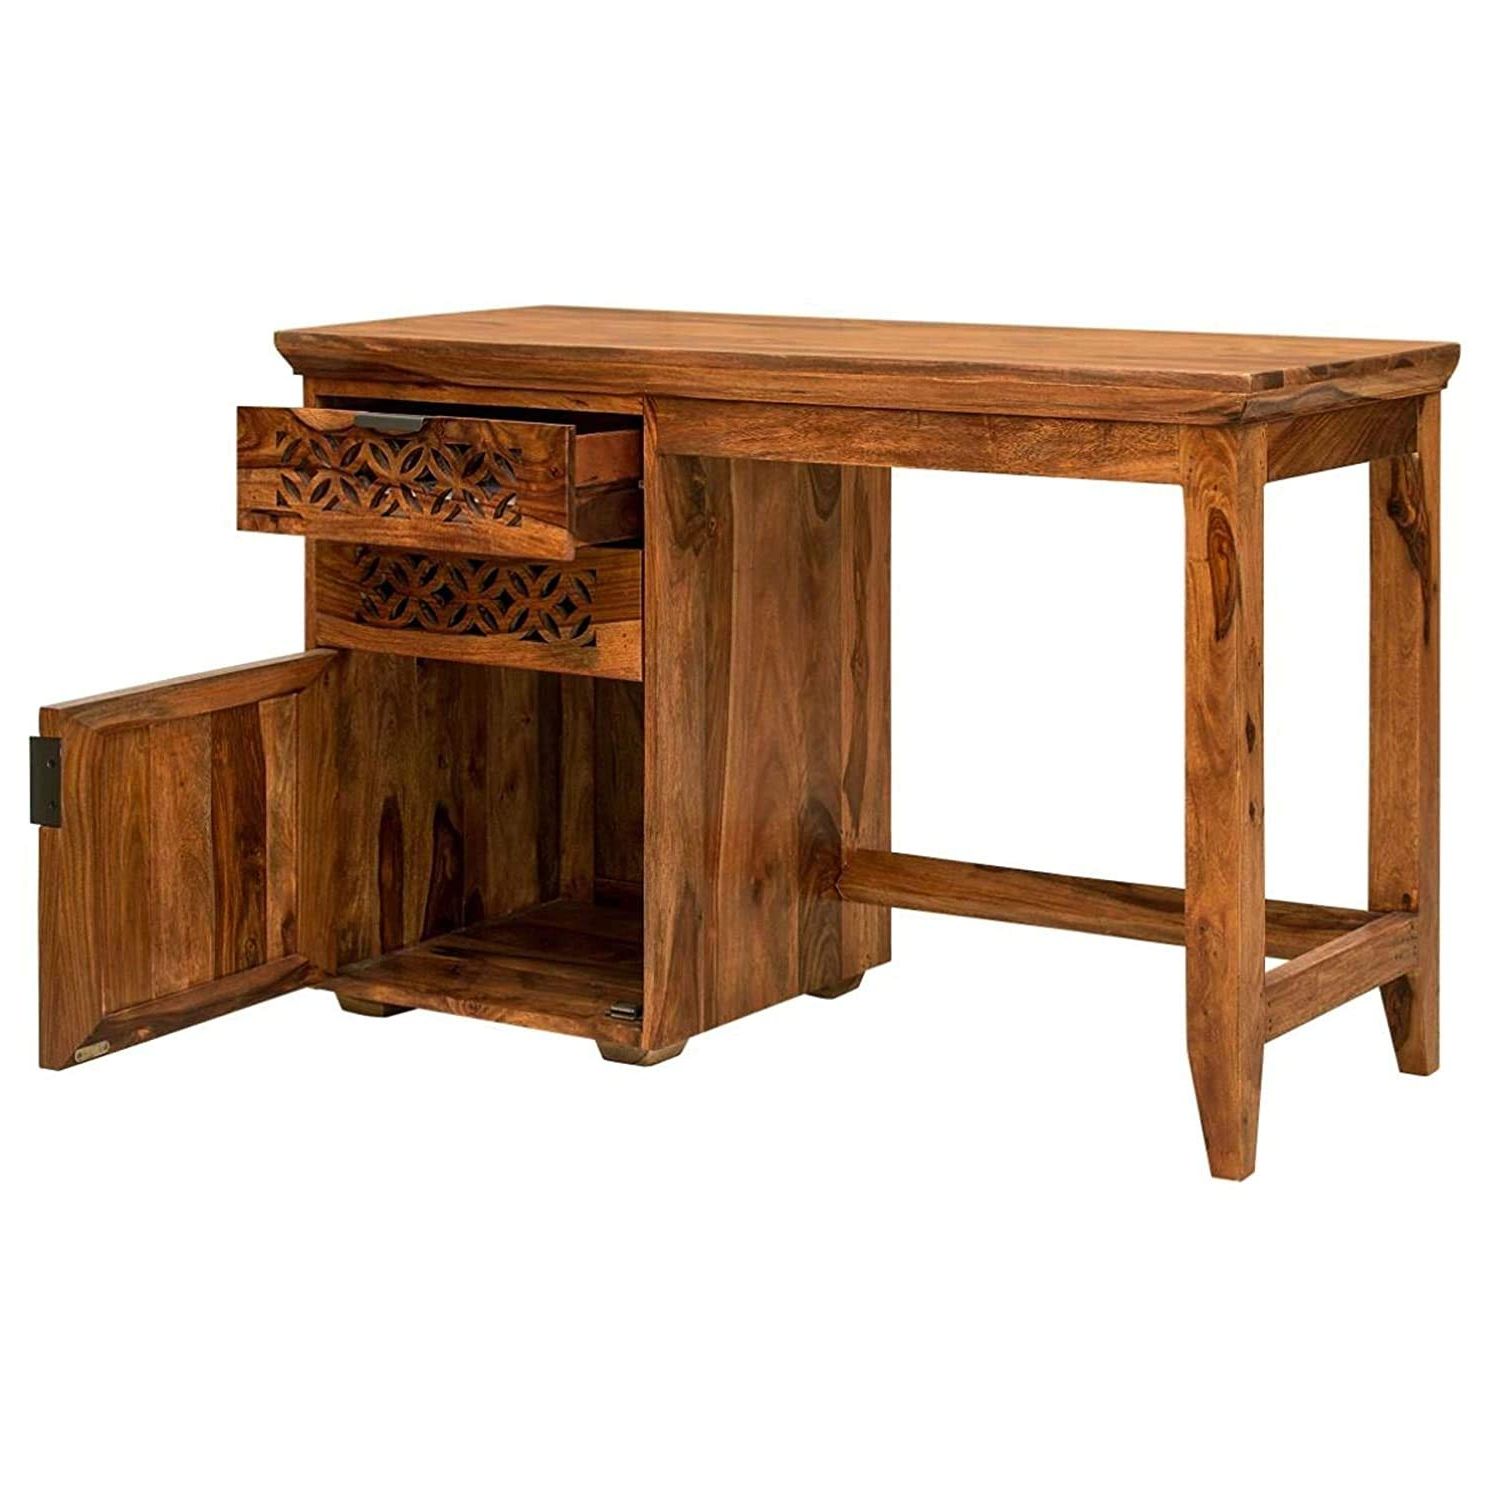 Popular Sheesham Wood Writing Desks Pertaining To Km Decor Sheesham Wood Writing Study Table For Home And Office 3 Drawer (View 3 of 15)